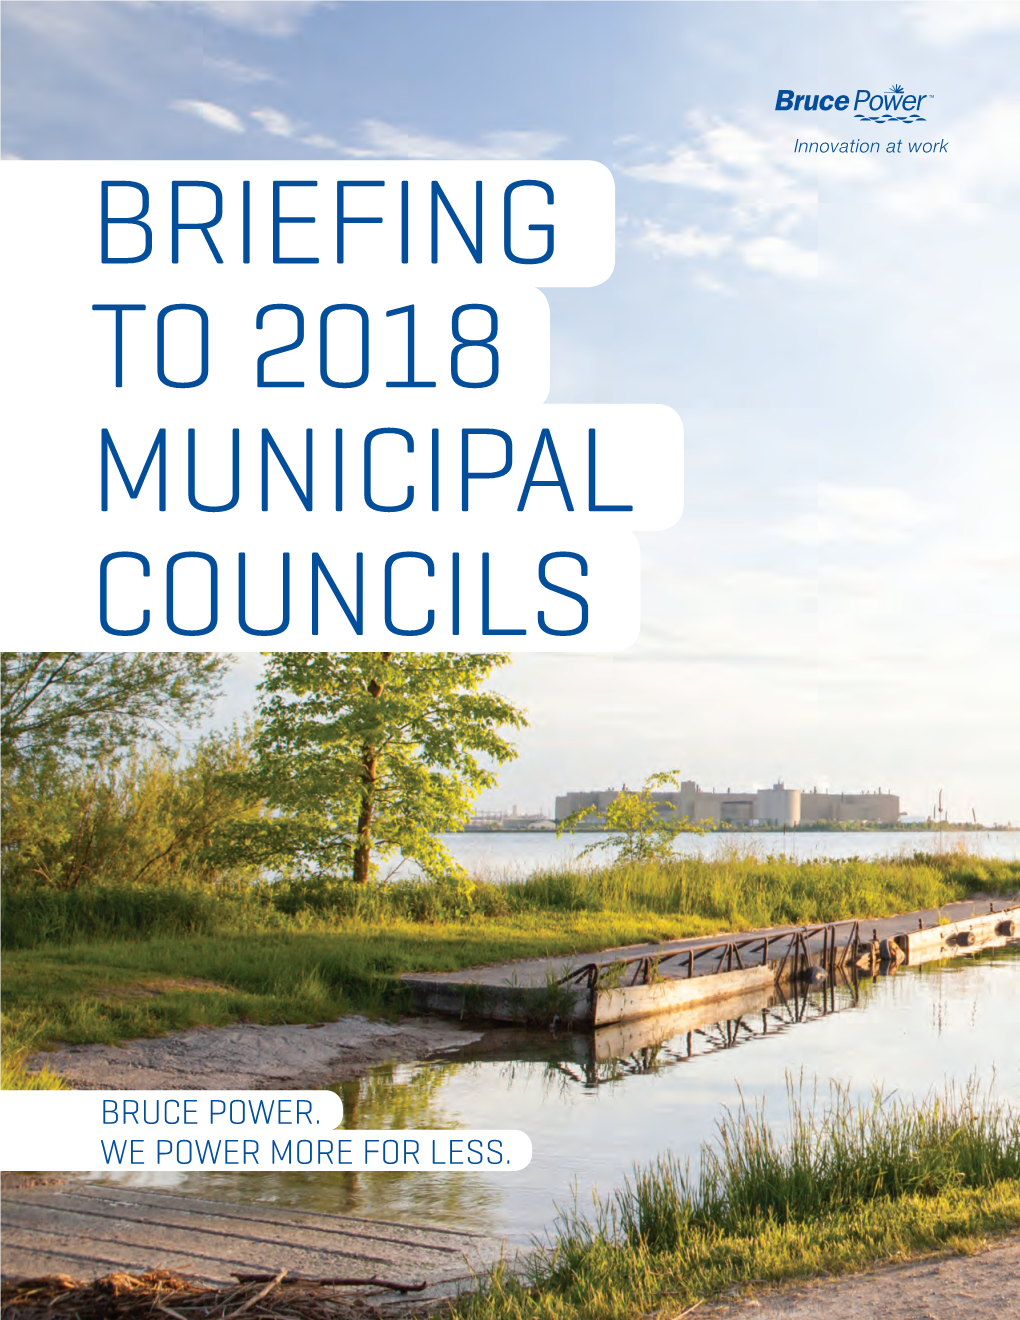 Download the Briefing Document for 2018 Municipal Councils